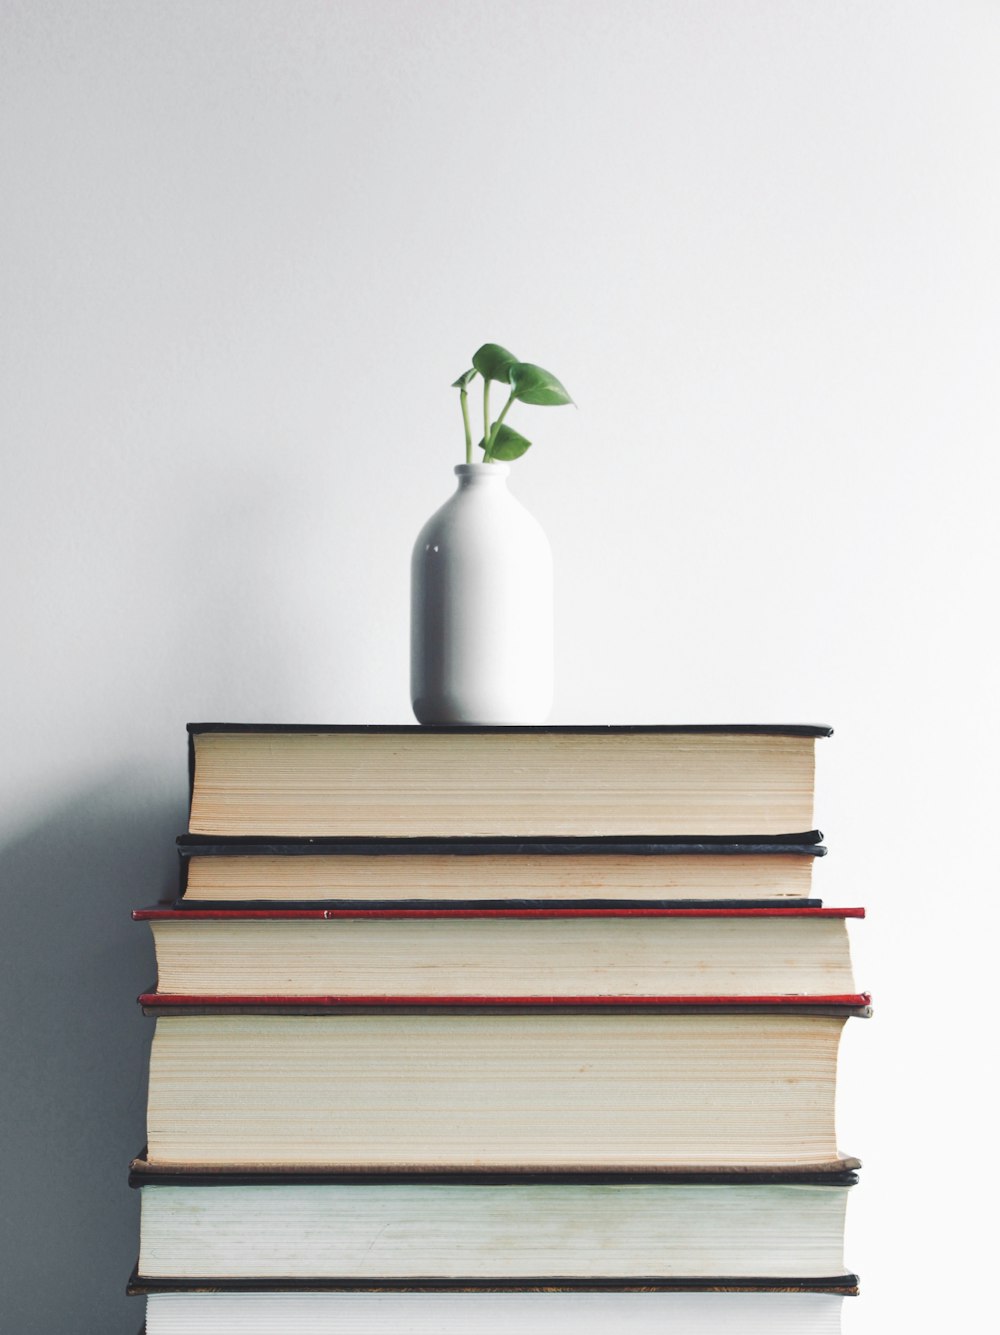 white ceramic vase with green plant on top of books